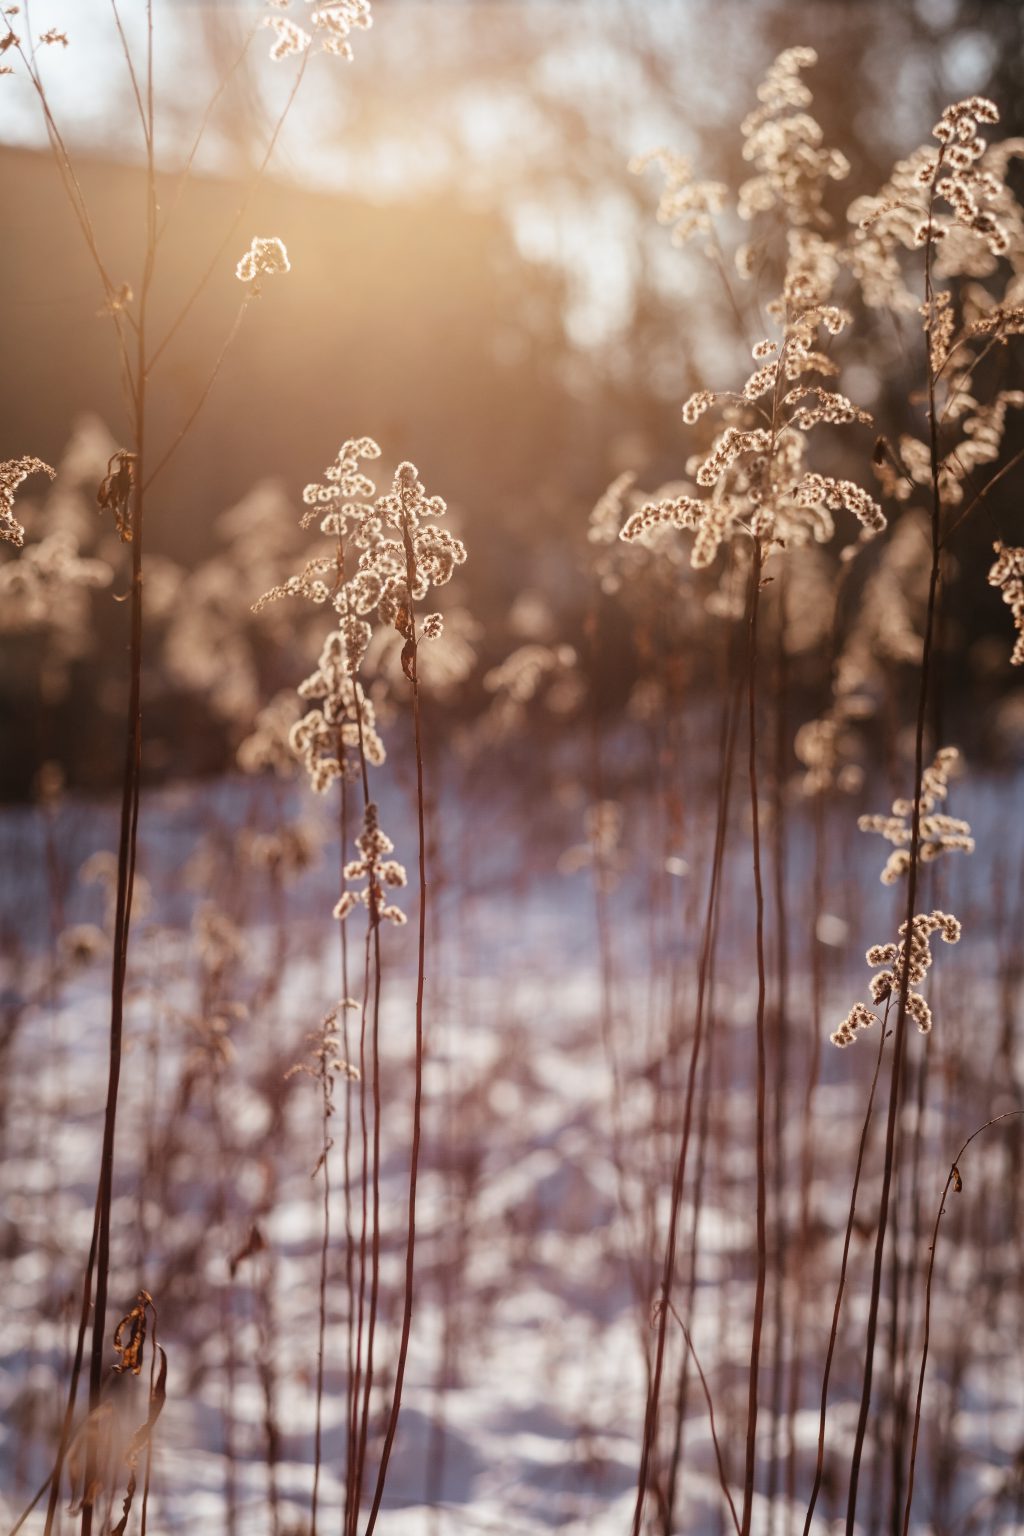 Wild grass in the sun on a winter afternoon 4 - free stock photo